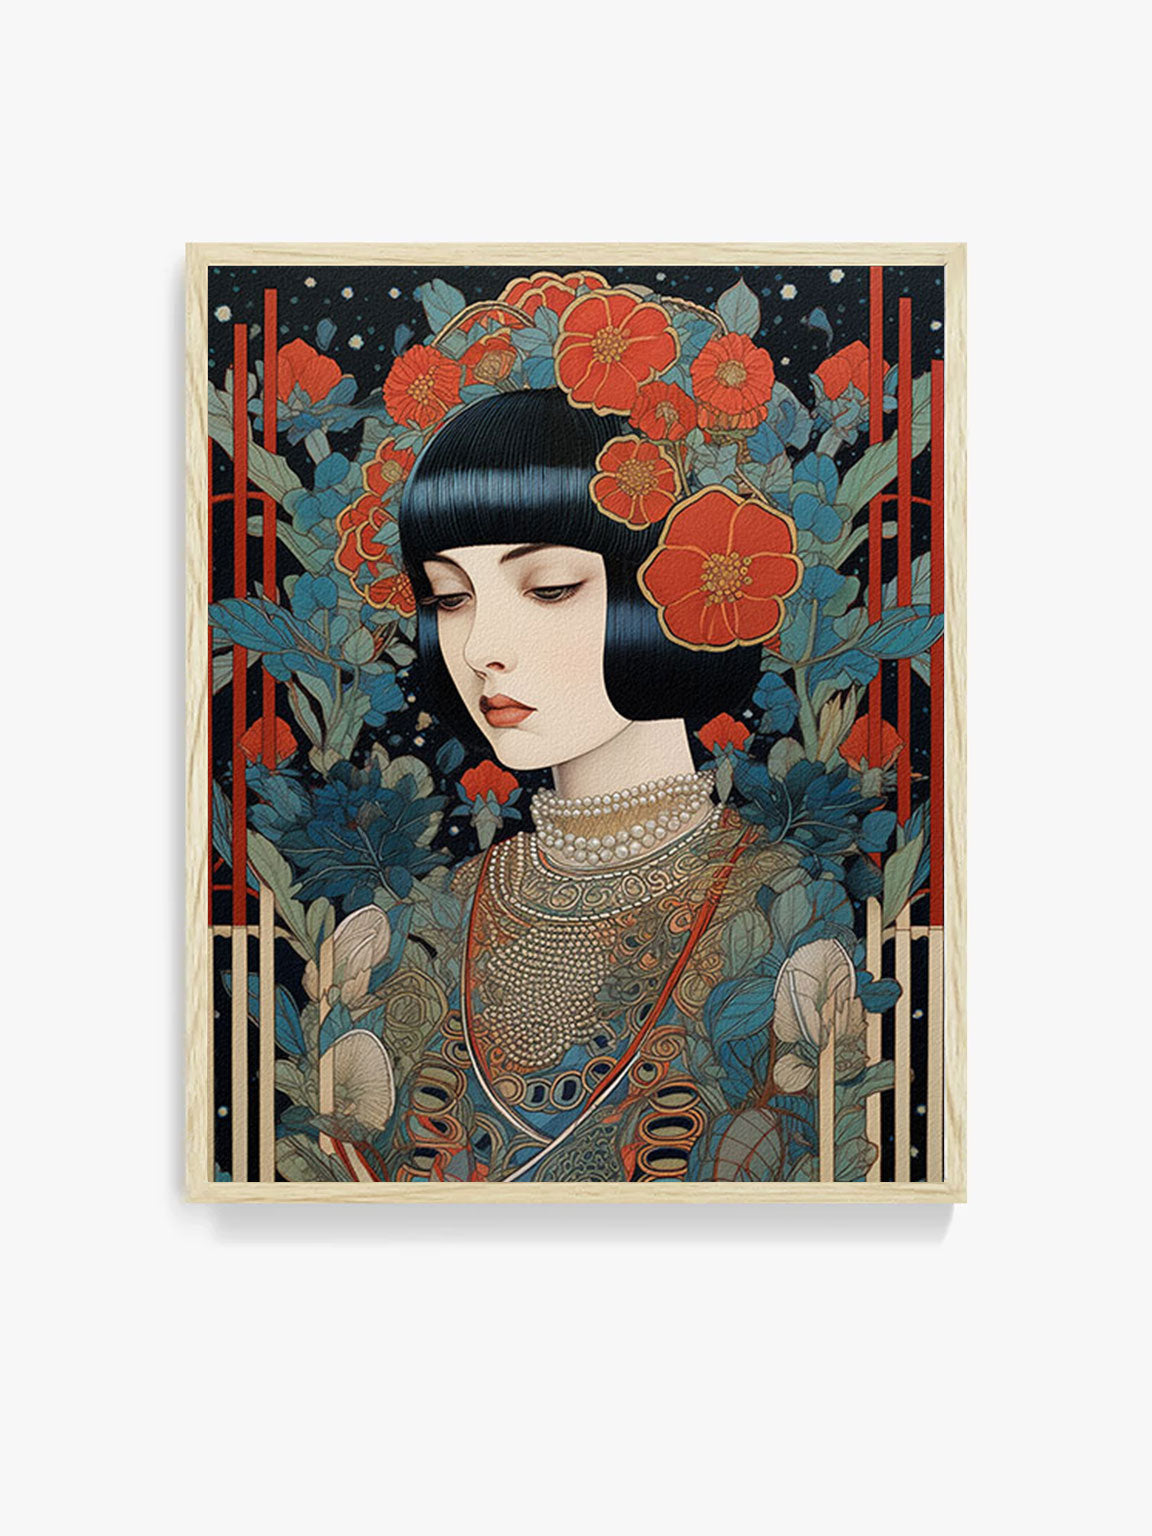 Art print poster, woman with black hair, vintage retro style, red flowers